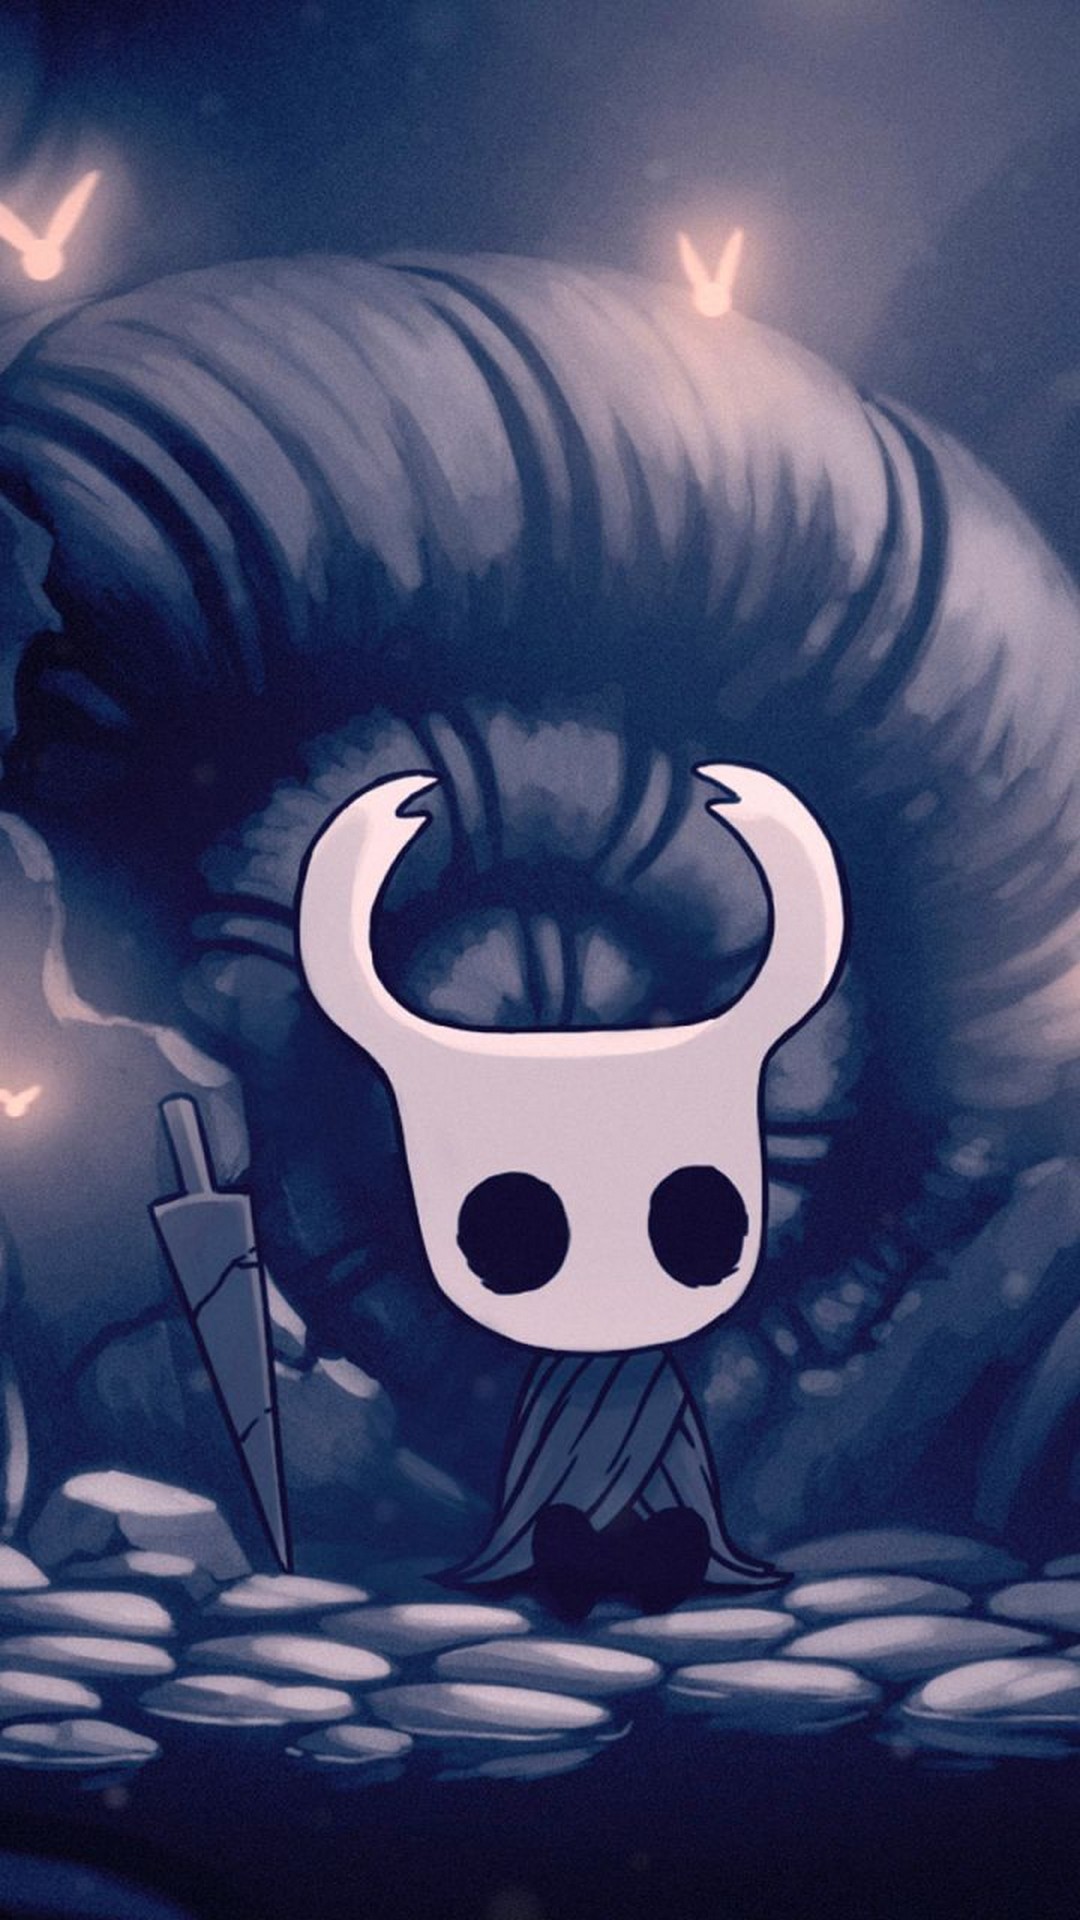 Hollow Knight Phone Wallpaper with high-resolution 1080x1920 pixel. Download all Mobile Wallpapers and Use them as wallpapers for your iPhone, Tablet, iPad, Android and other mobile devices